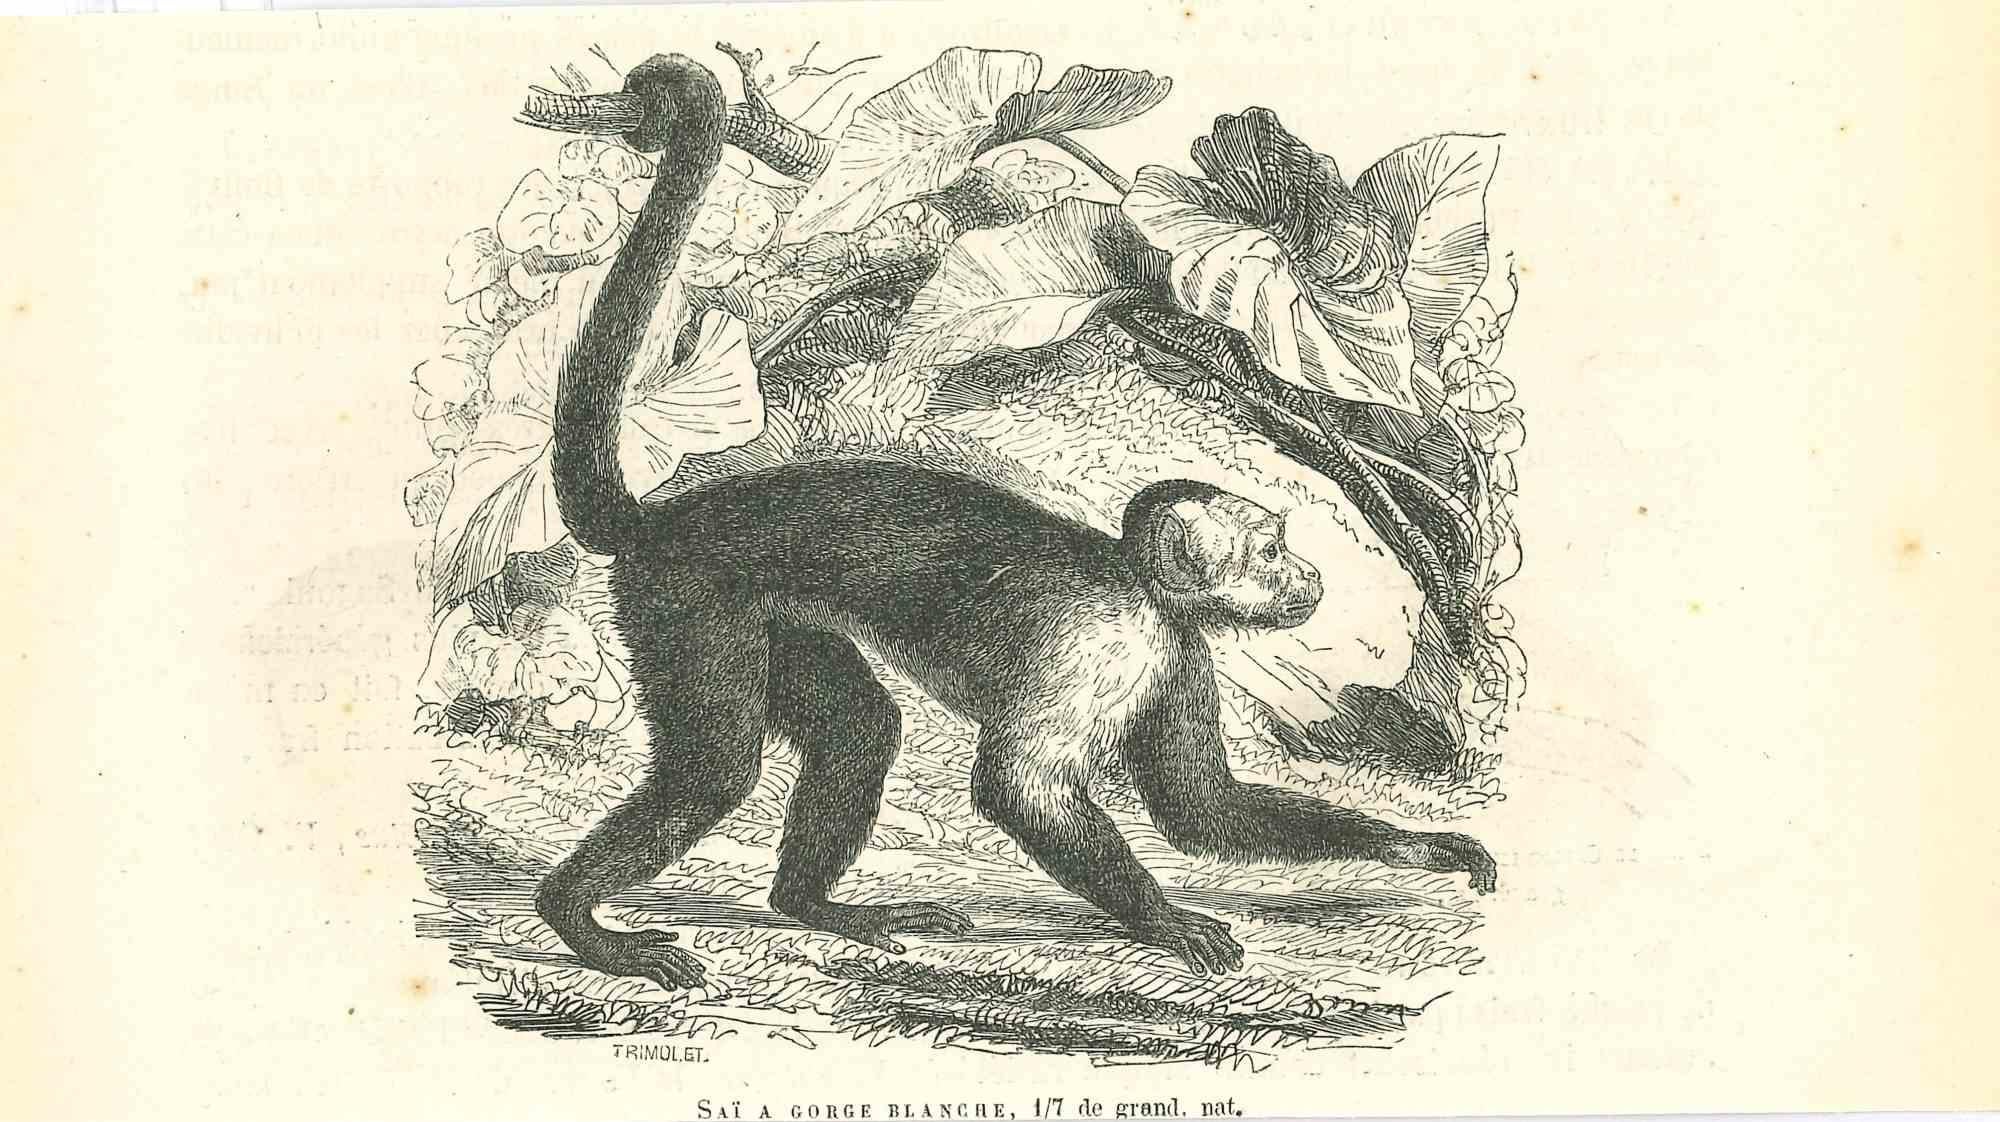 The Monkey is an original lithograph on ivory-colored paper, realized by Paul Gervais (1816-1879). The artwork is from The Series of "Les Trois Règnes de la Nature", and was published in 1854.

Good conditions.

Titled on the lower. With the notes